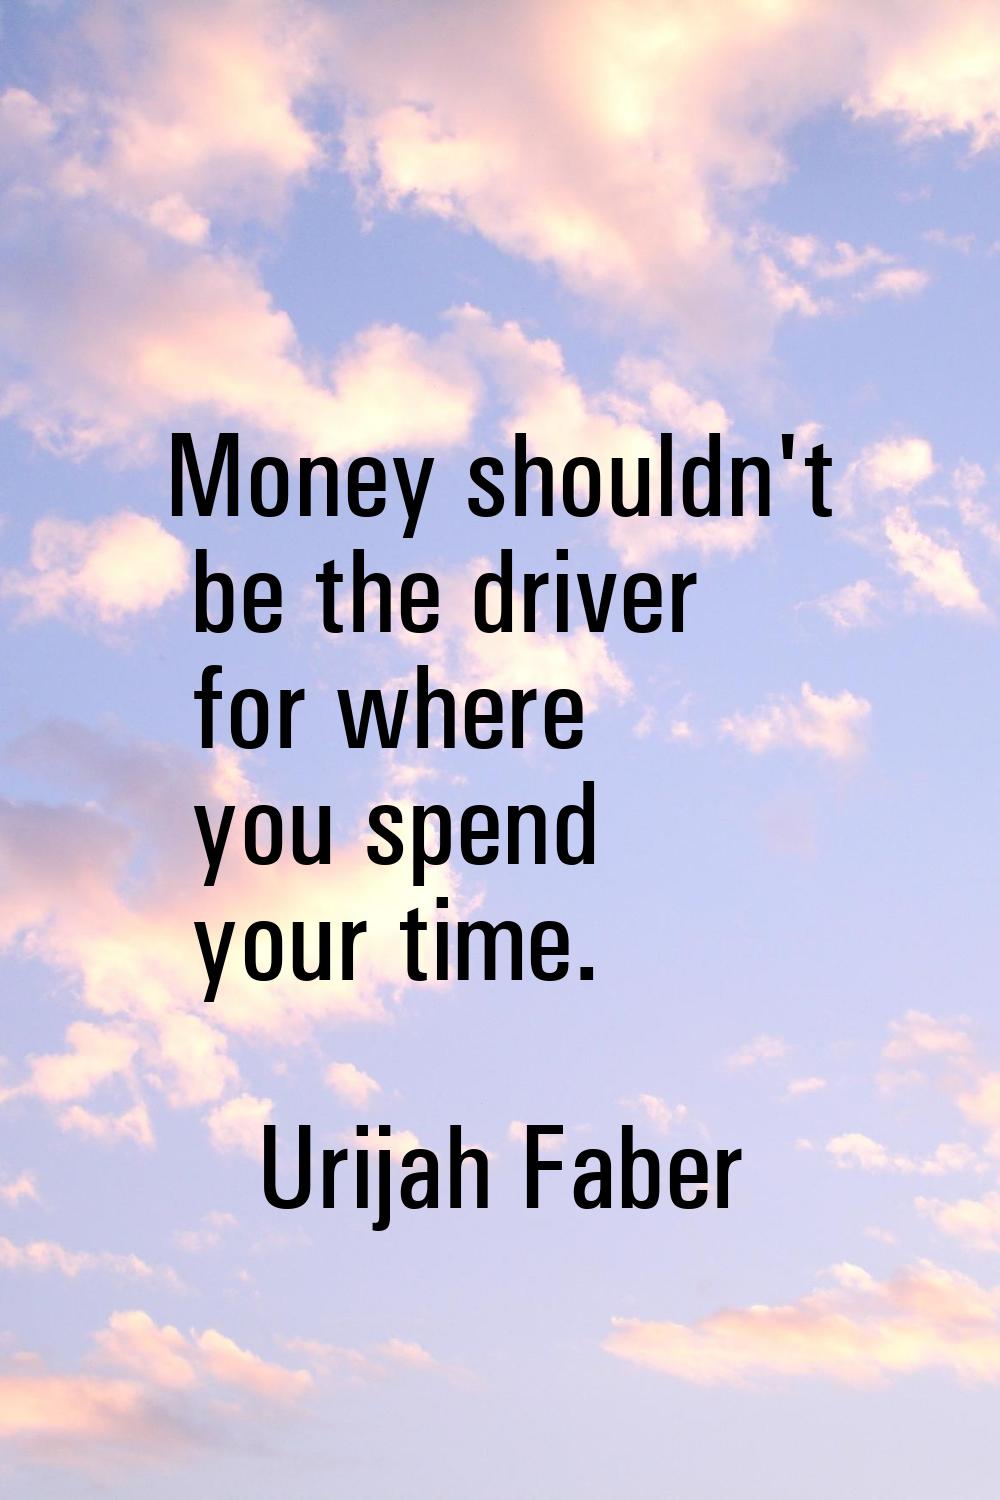 Money shouldn't be the driver for where you spend your time.